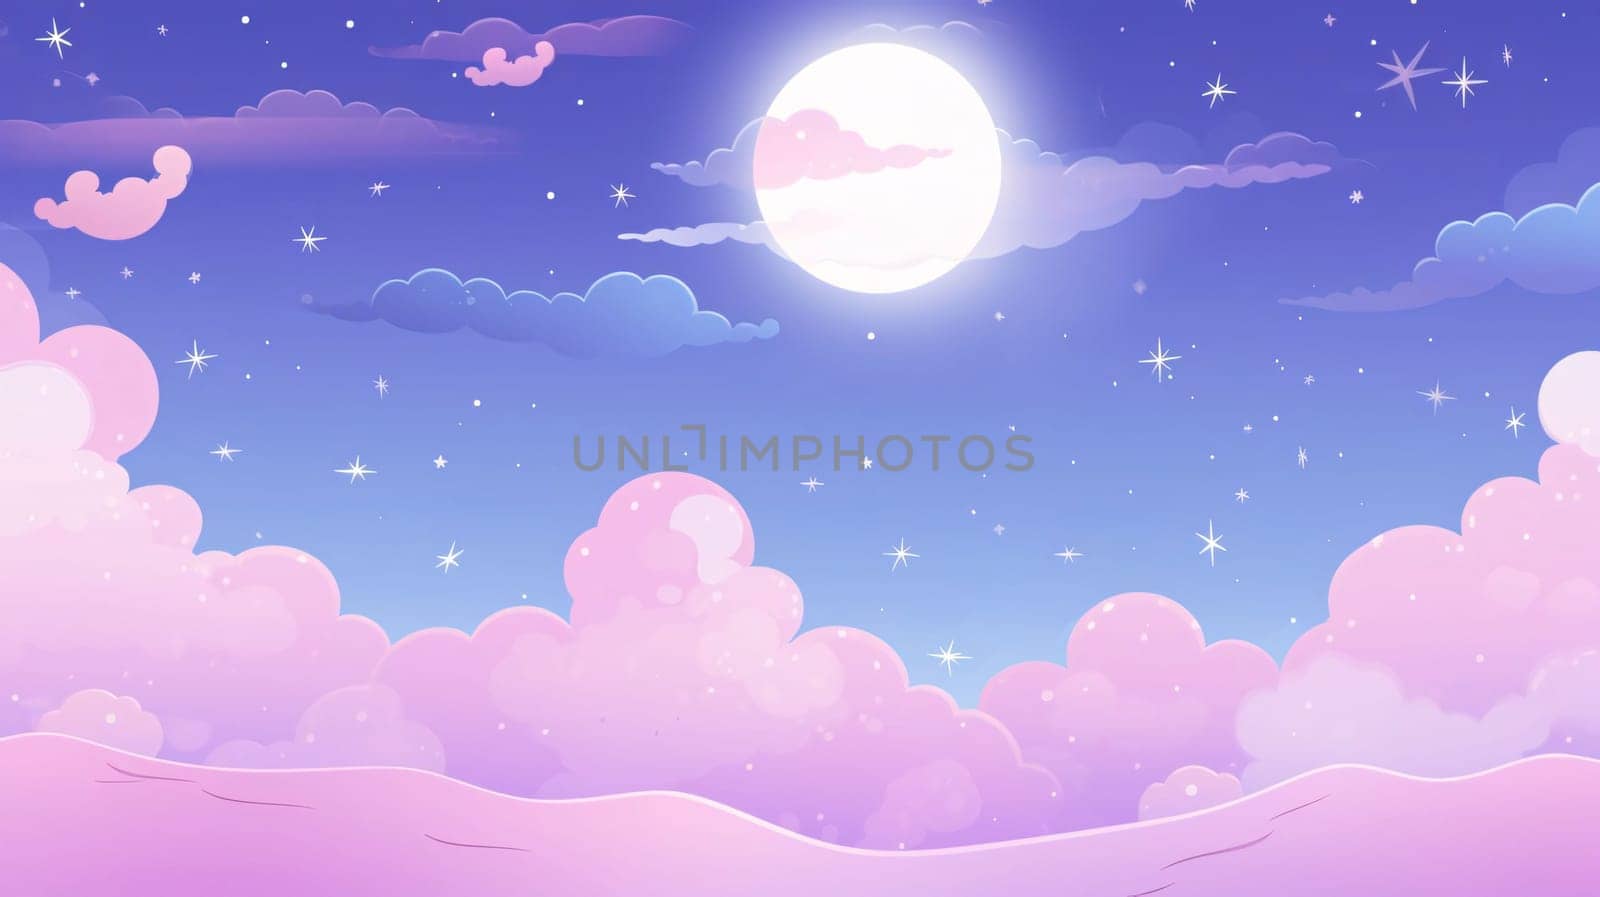 Banner: Night sky background with clouds and full moon. Vector illustration. Eps 10